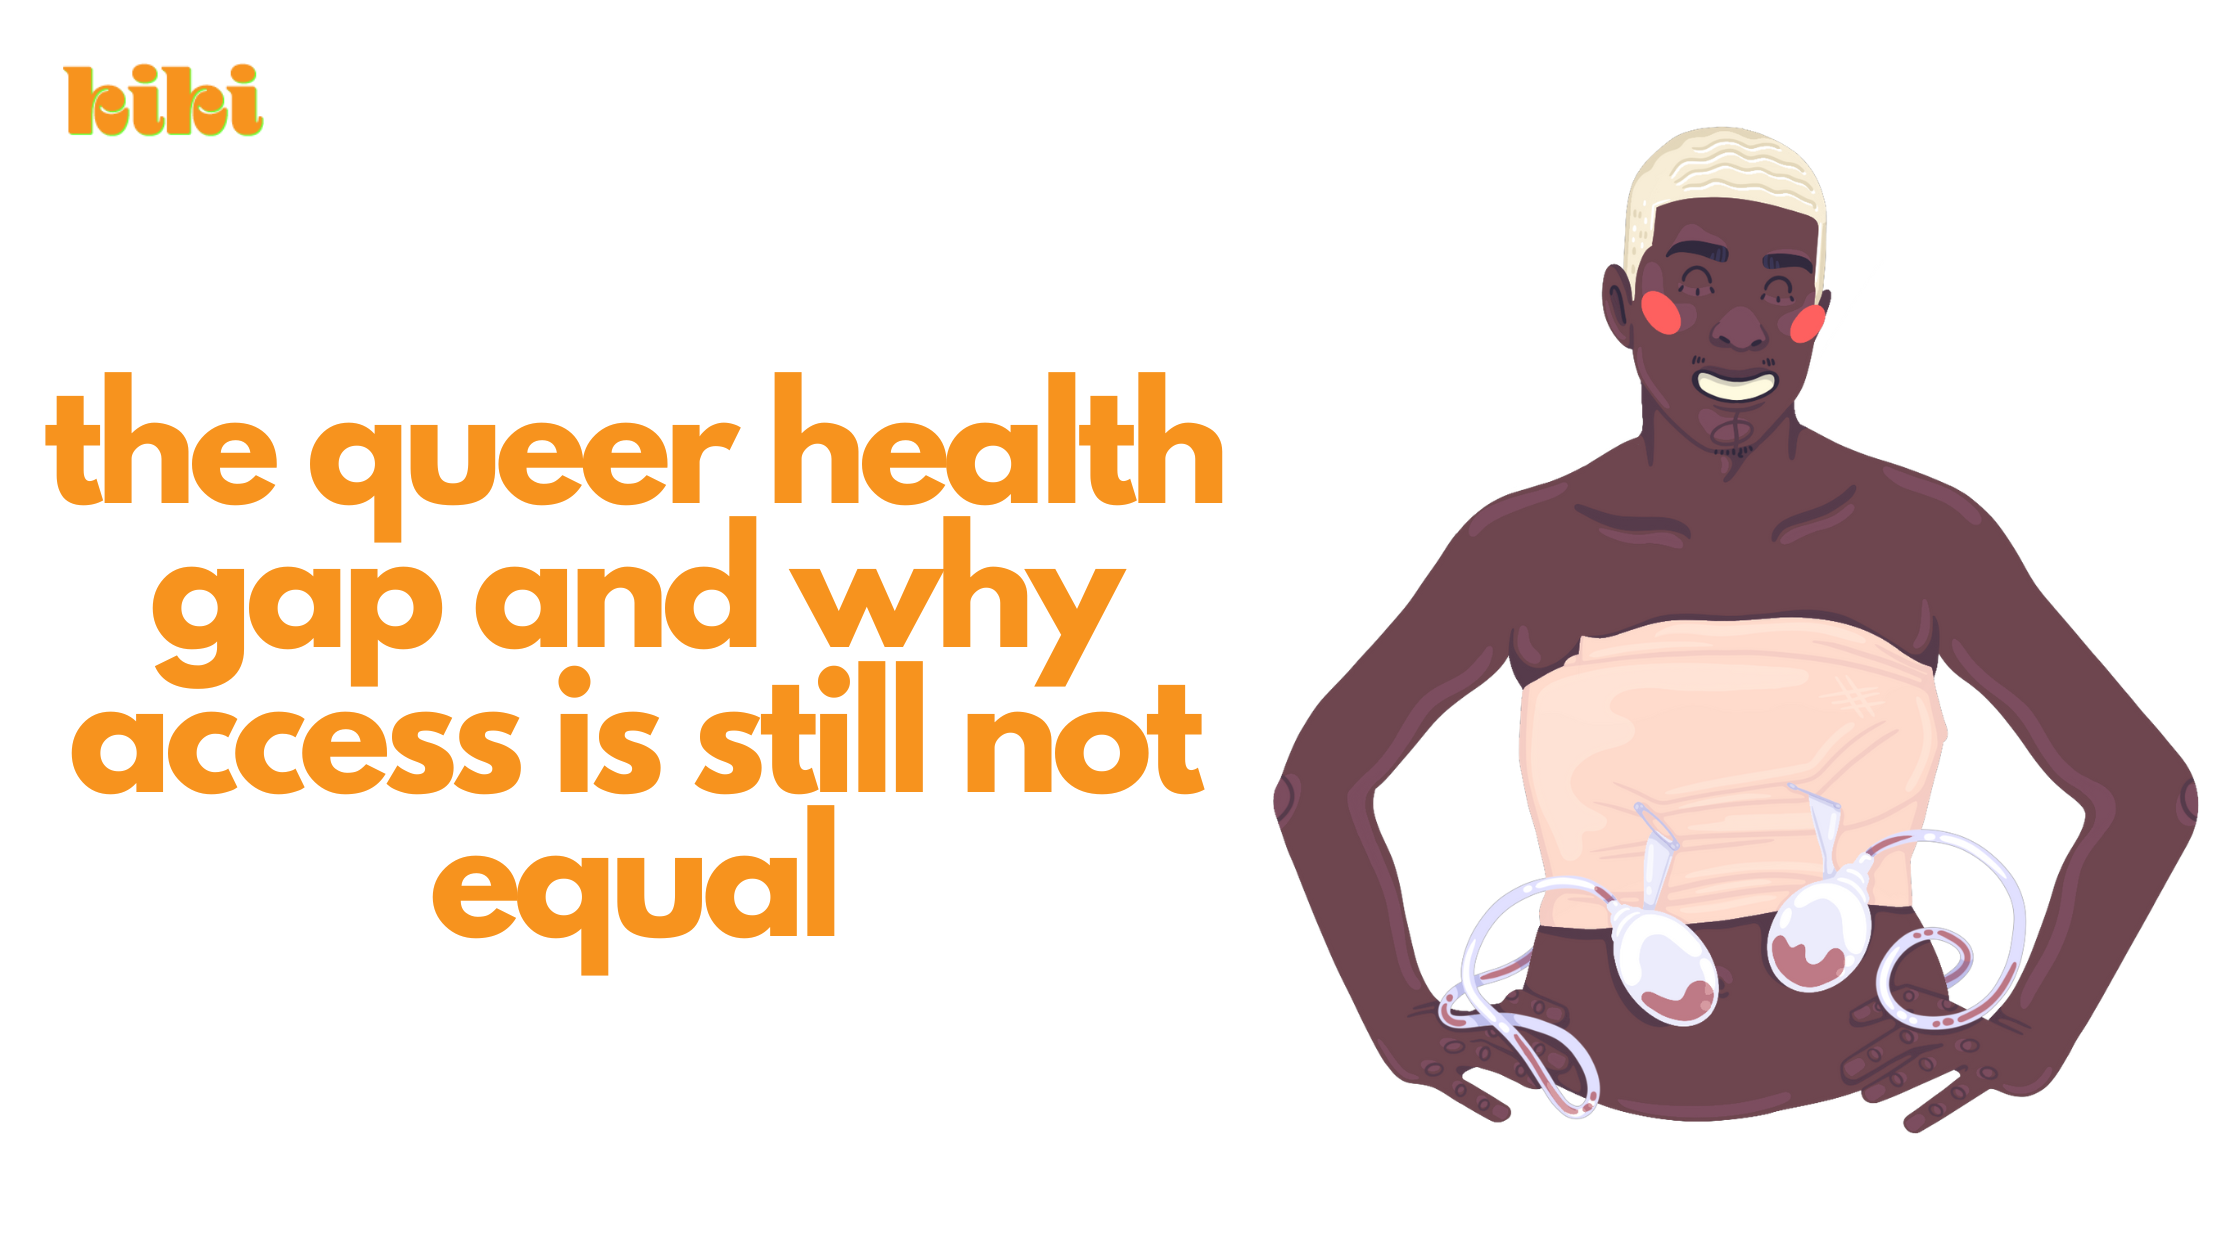 The Queer Health Gap And Why Access is Still Not Equal next to an illustration of a Black trans man with top surgery bandages and fluid drainage bottles.